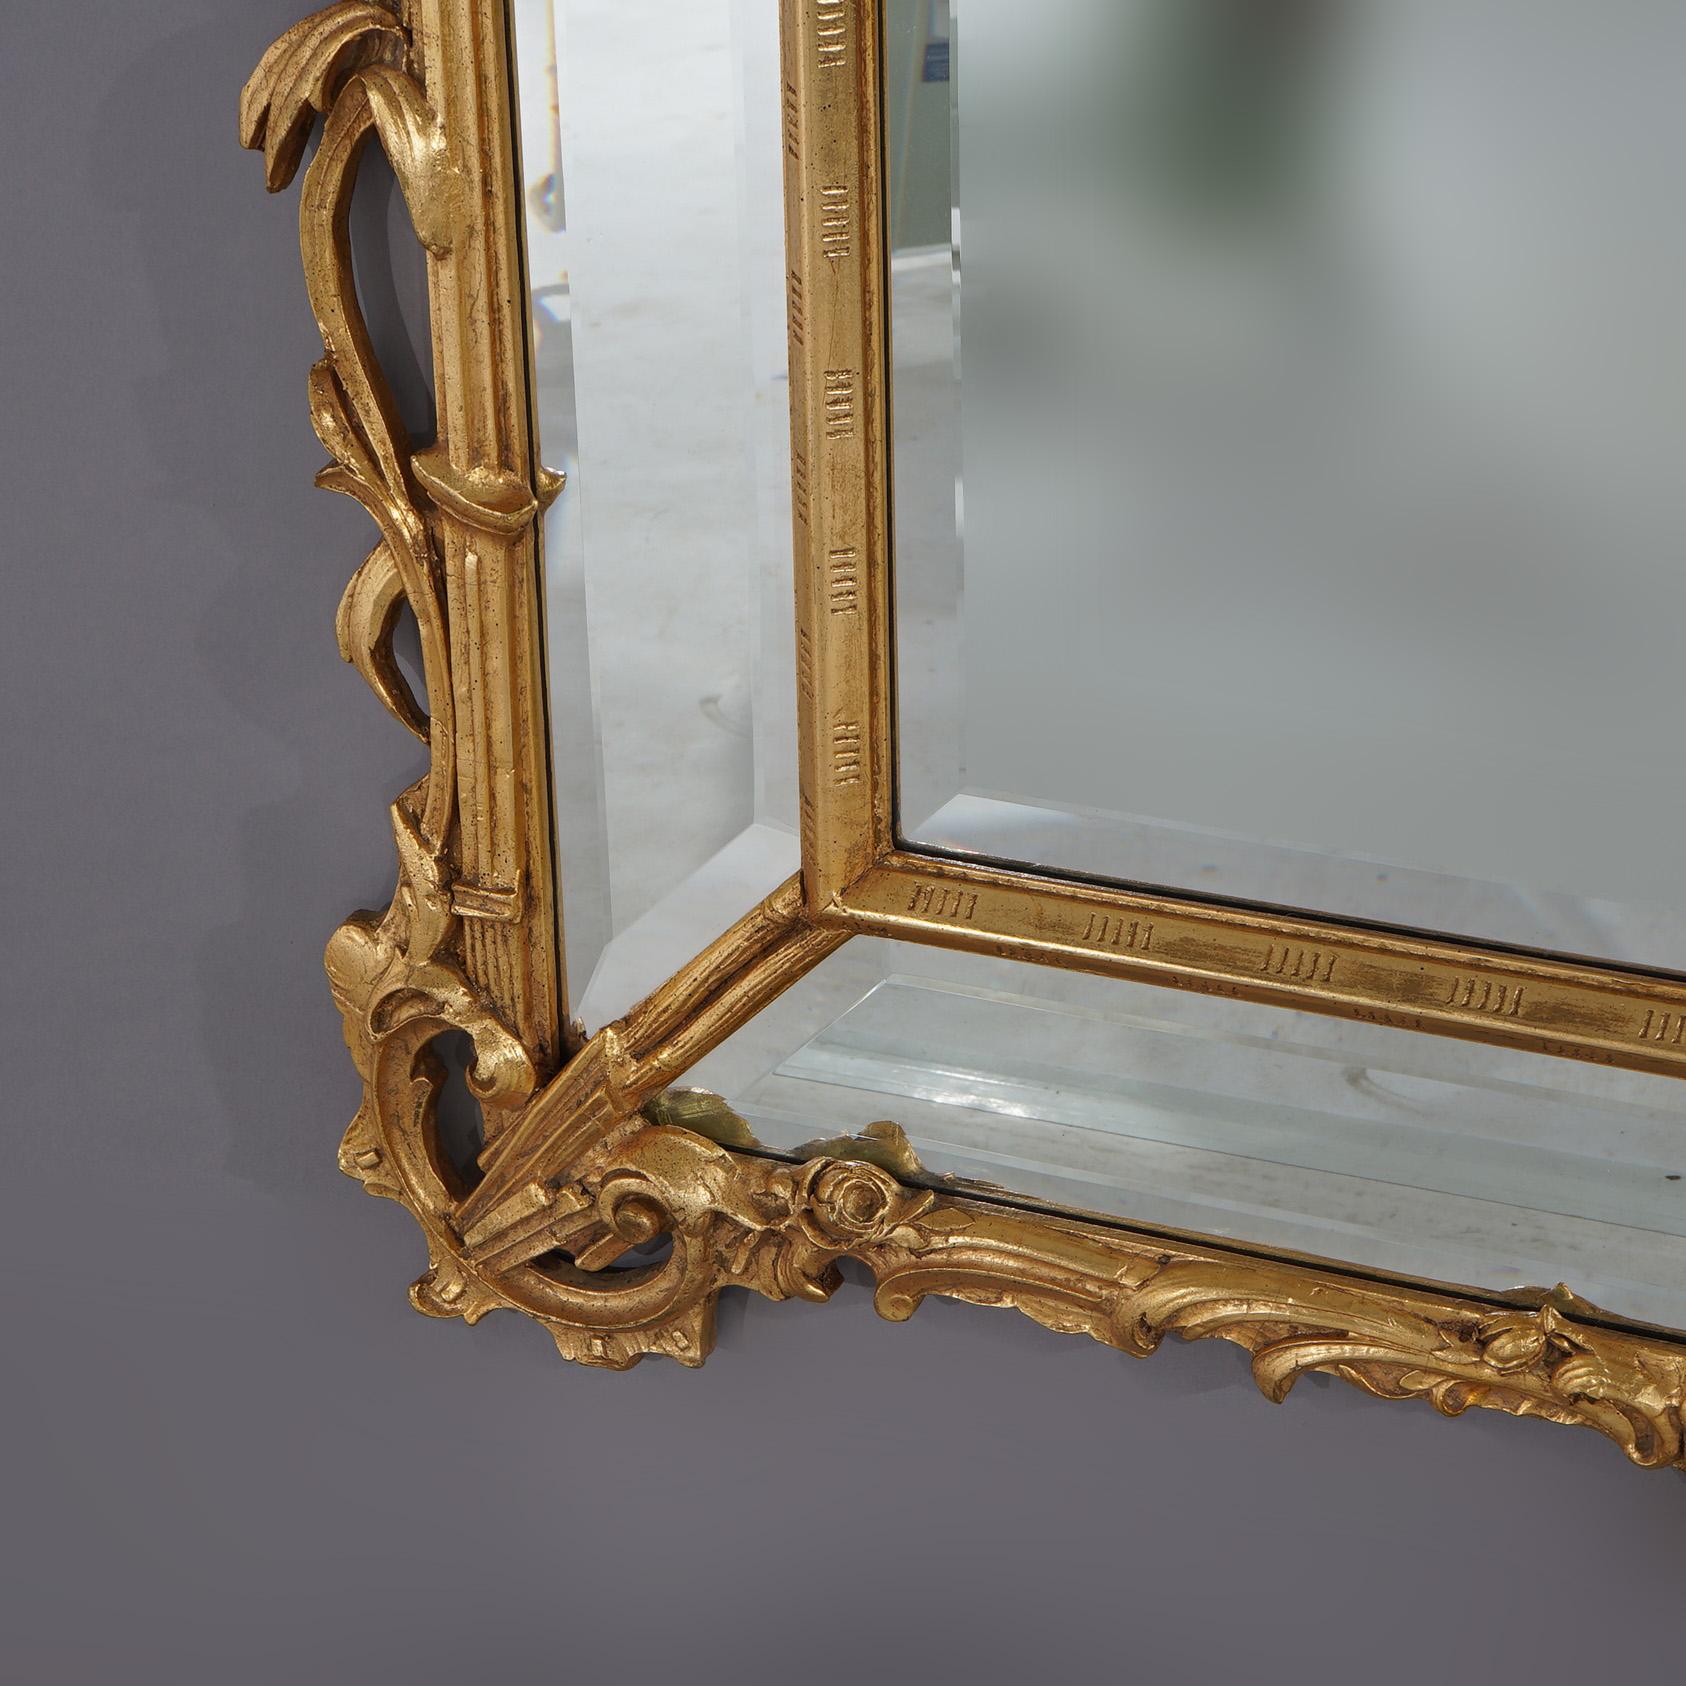 Figural Chinese Chippendale Parclose Giltwood Wall Mirror with Phoenix 20th C For Sale 5